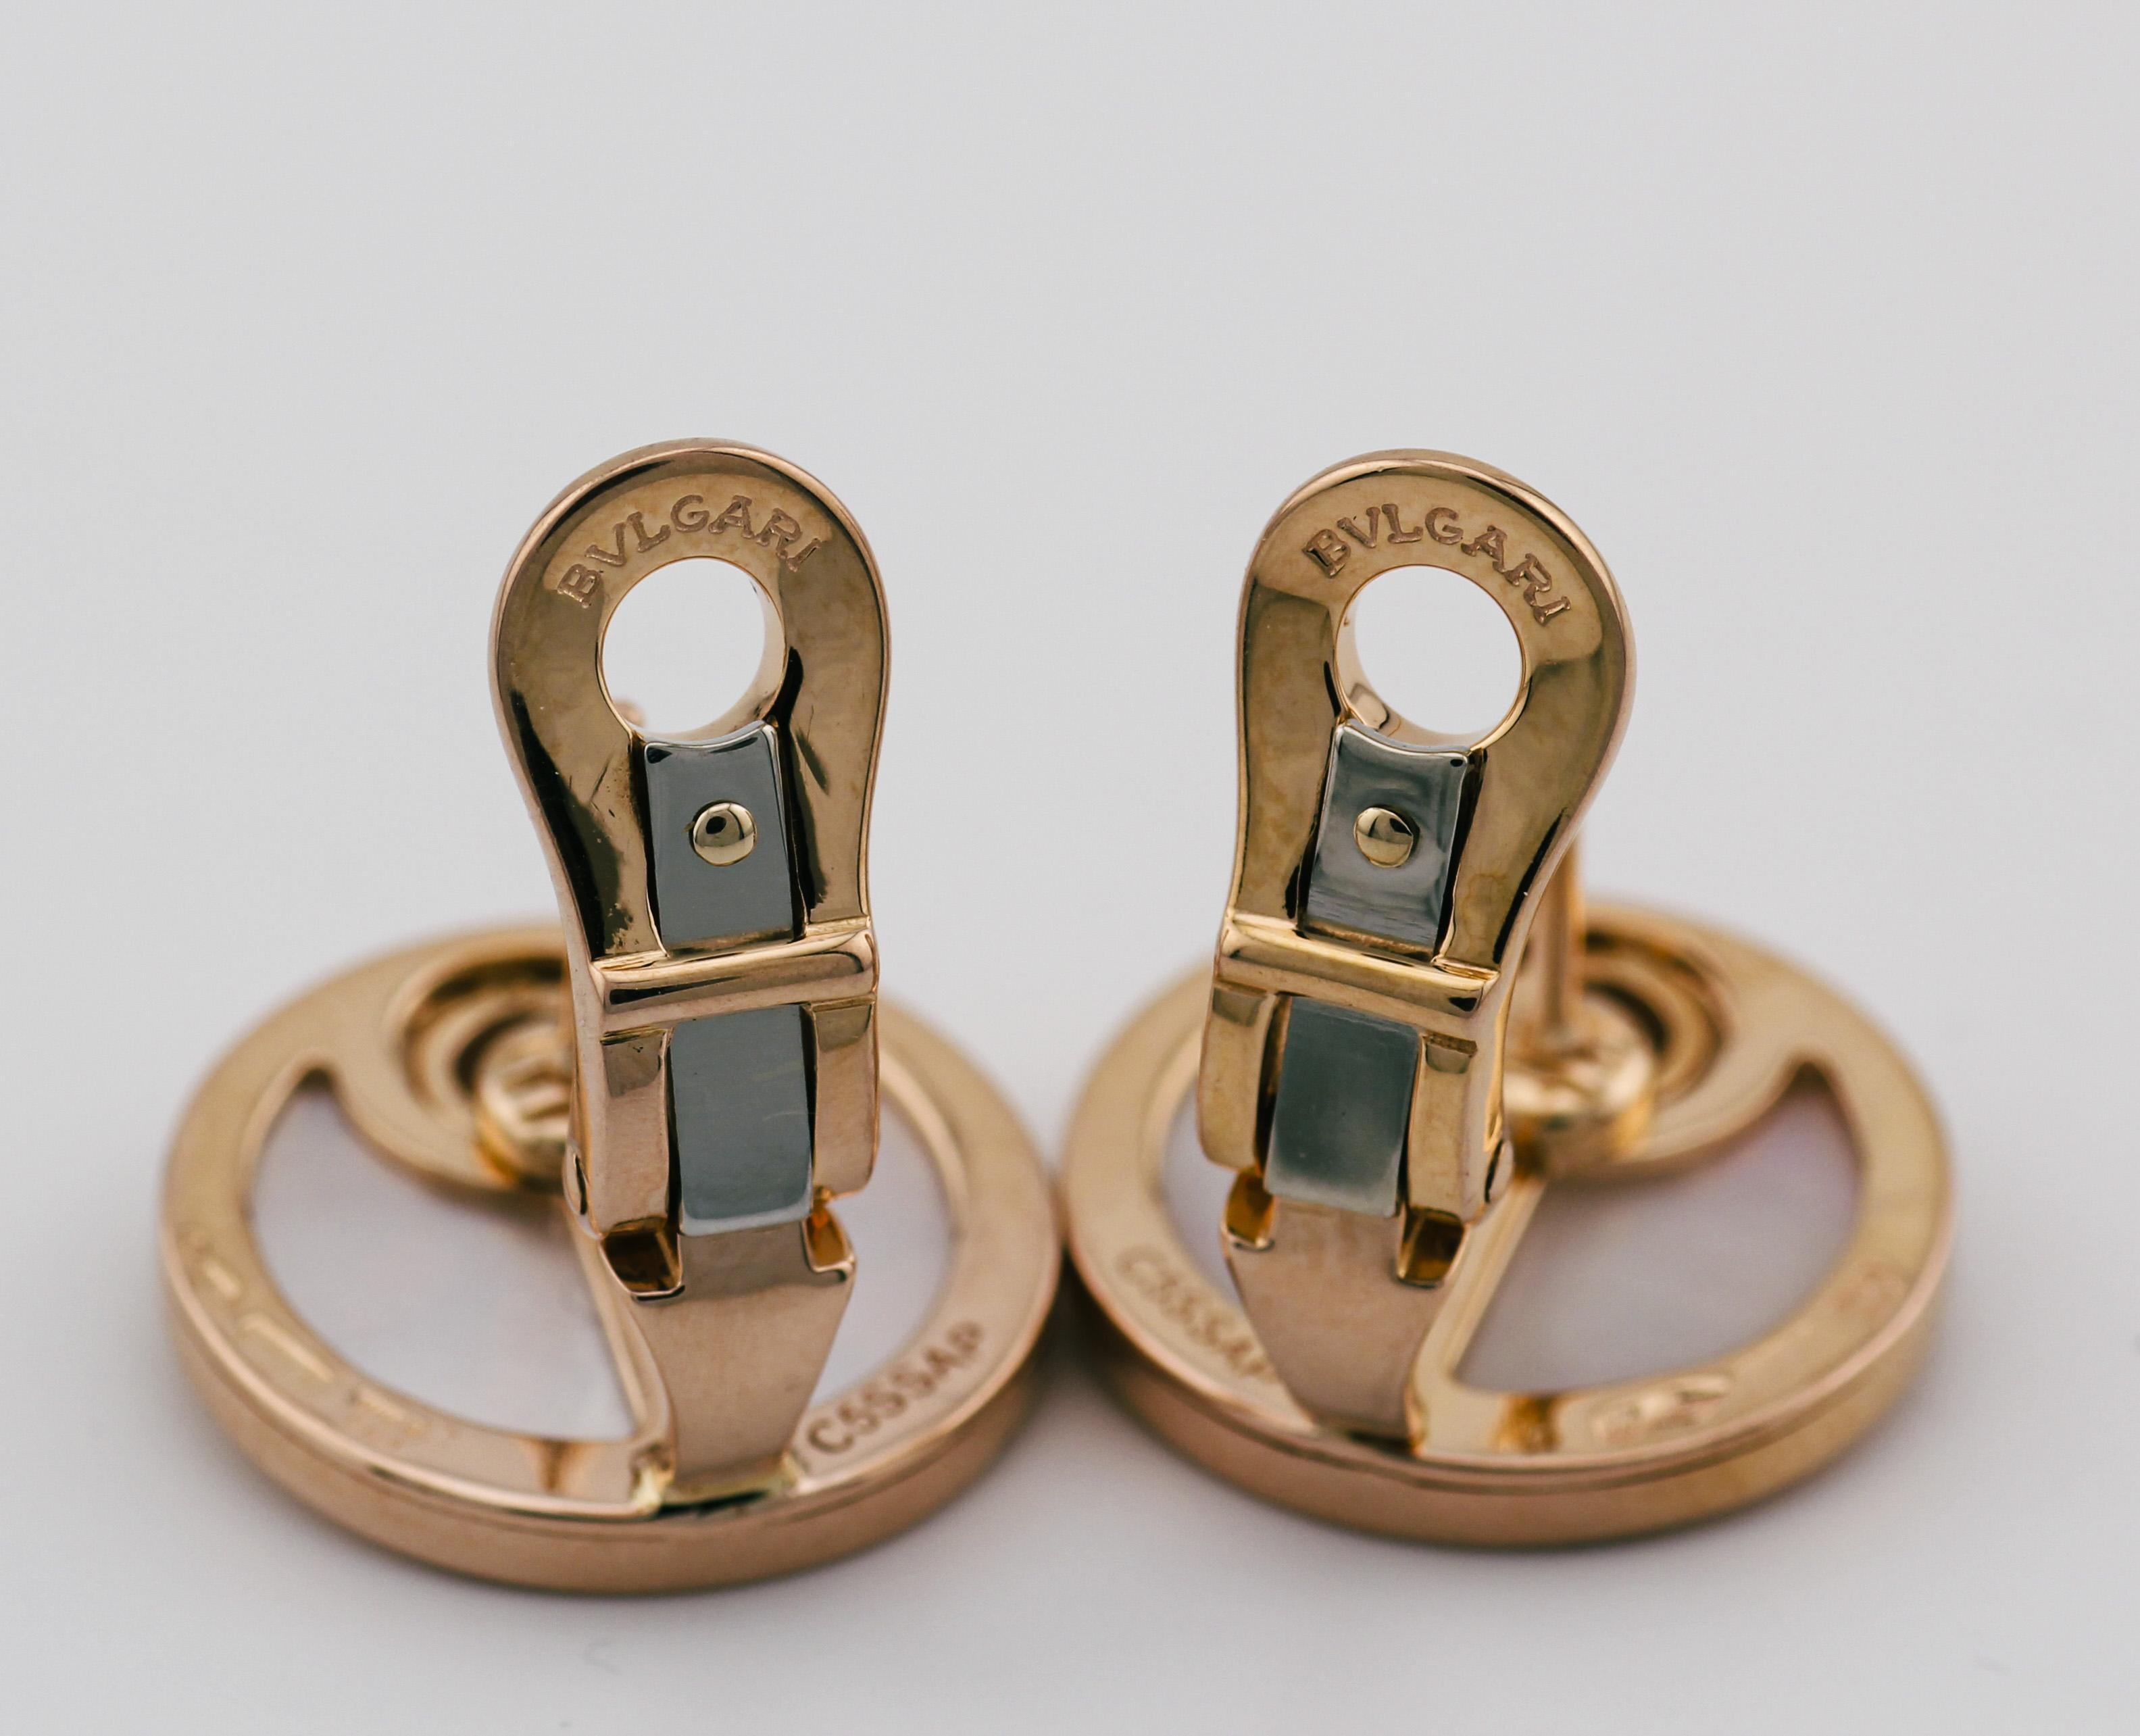 Bulgari Diamond MOP 18K Rose Gold Intarsio Earrings In Good Condition For Sale In Bellmore, NY